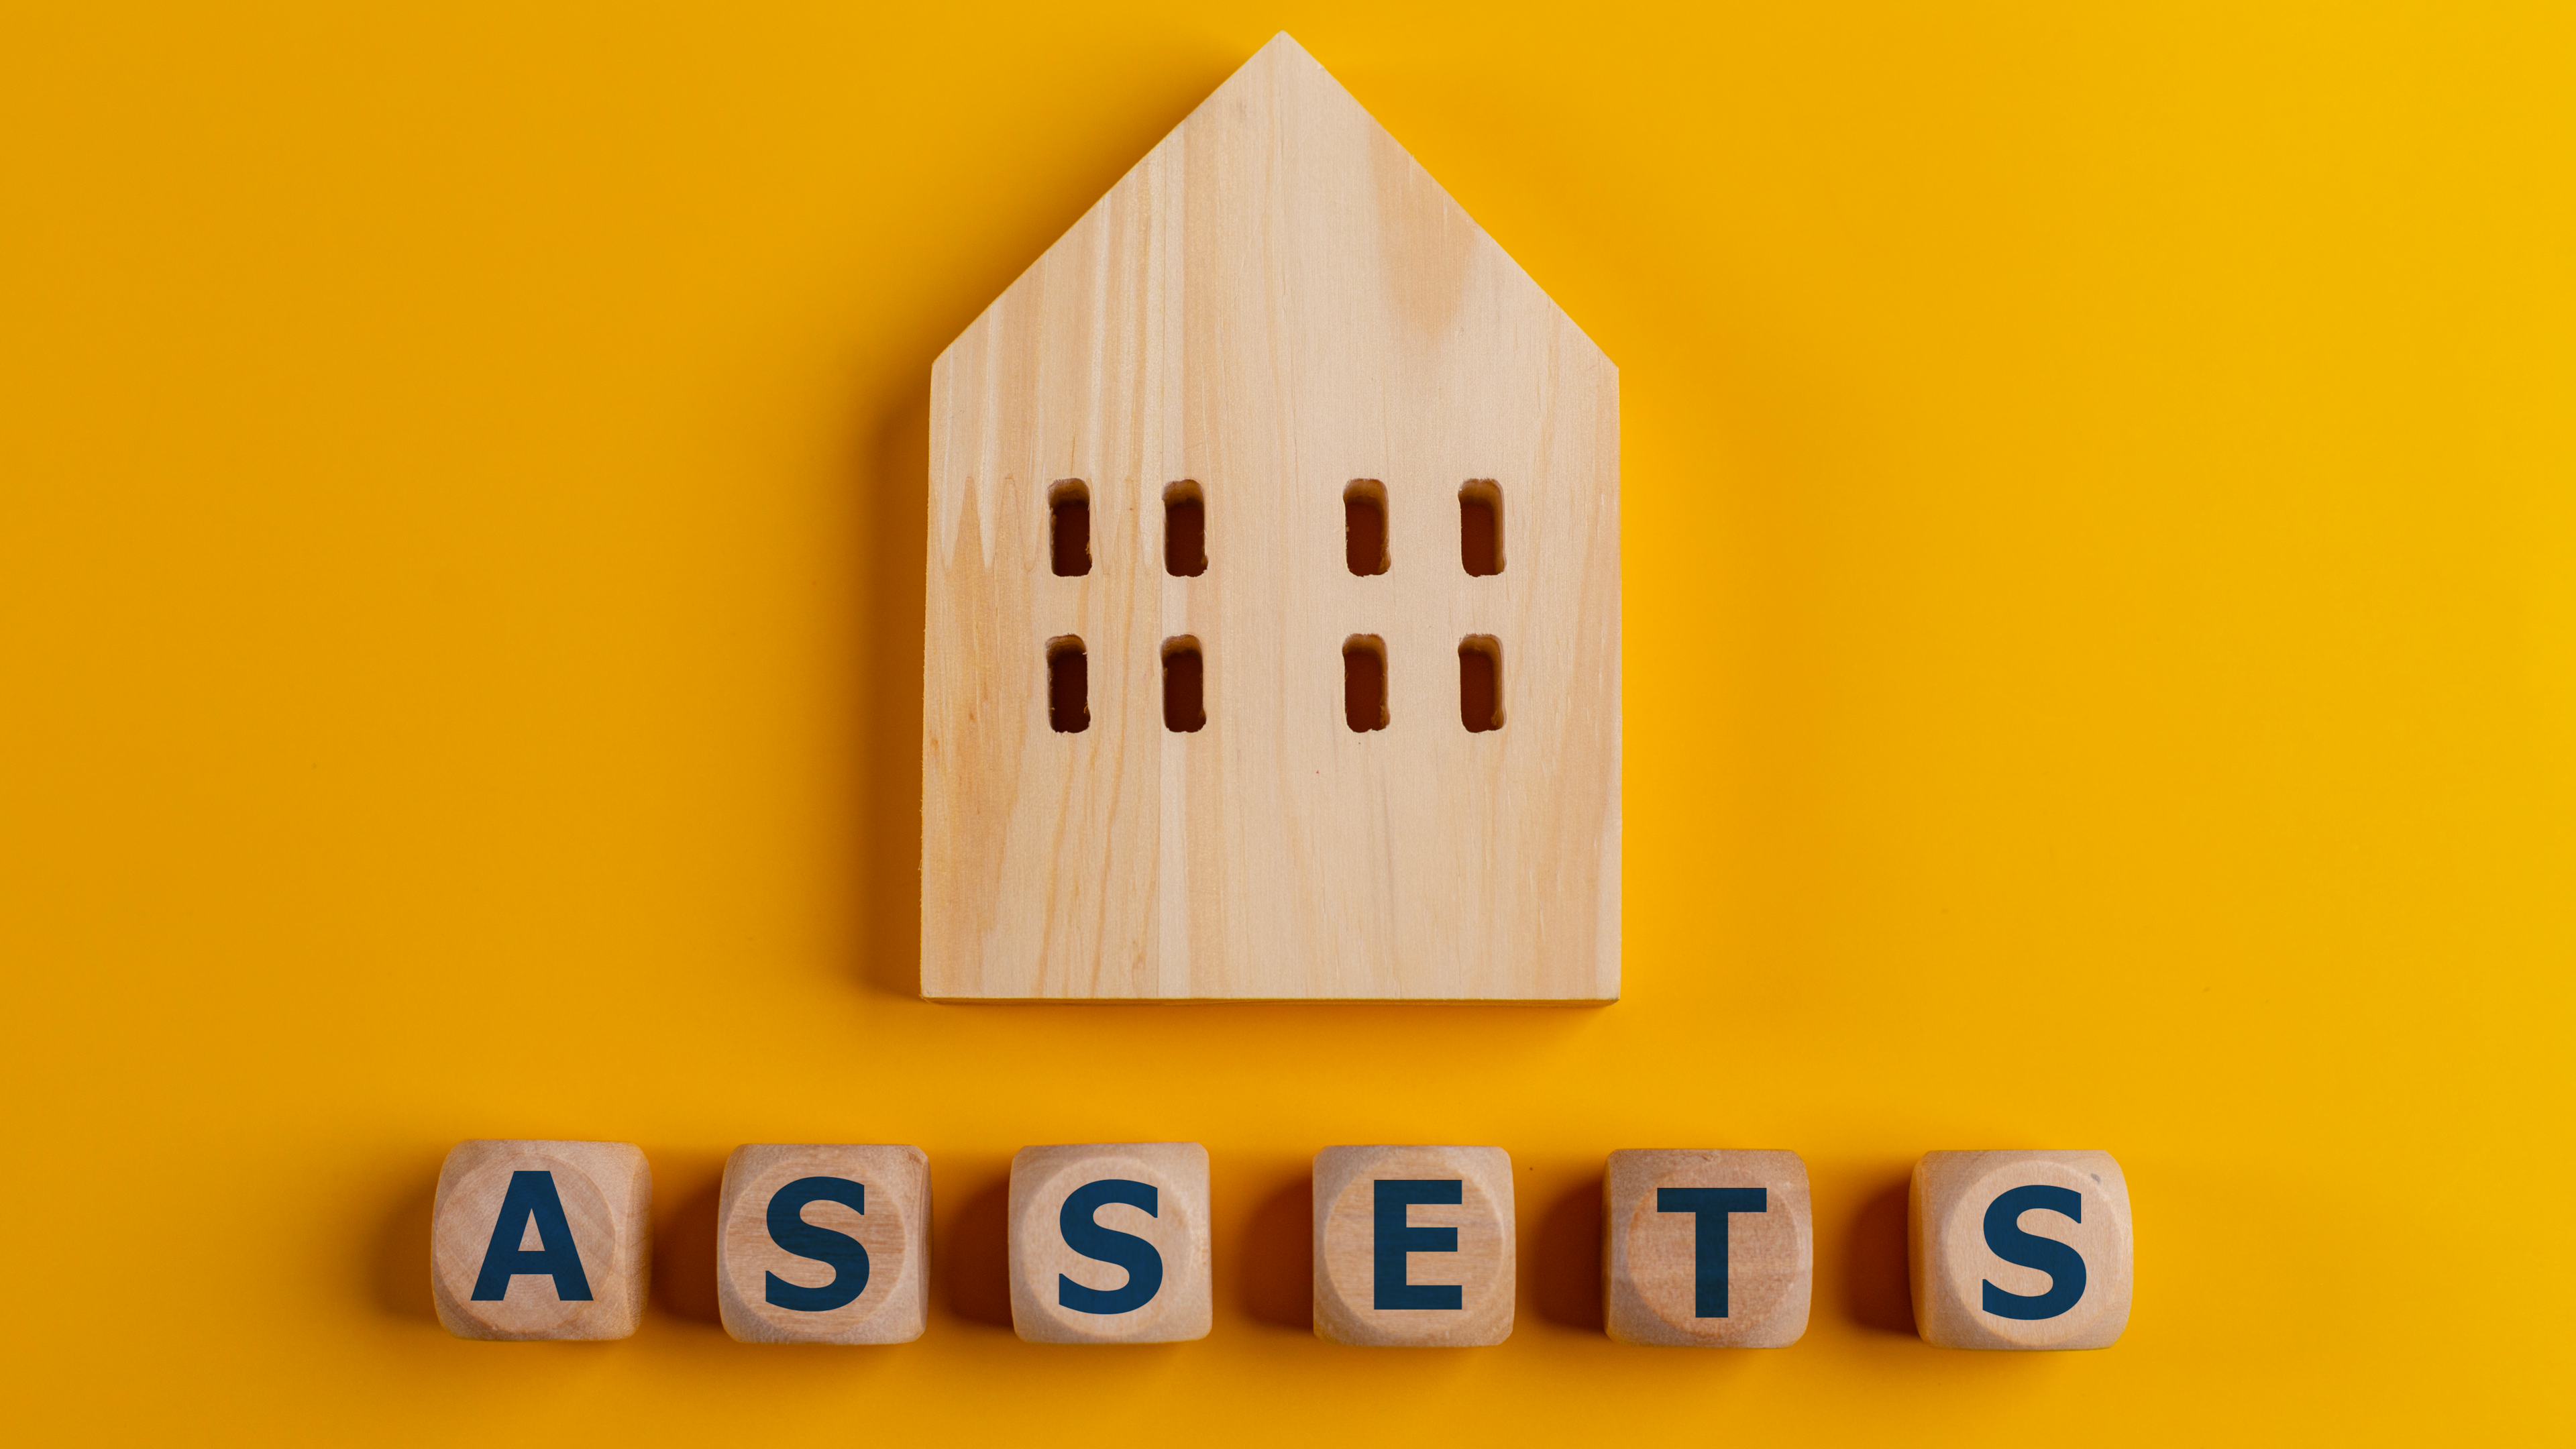 "Asset Protection Attorney: Safeguarding your assets, depicted with wooden cubes on a yellow backdrop."